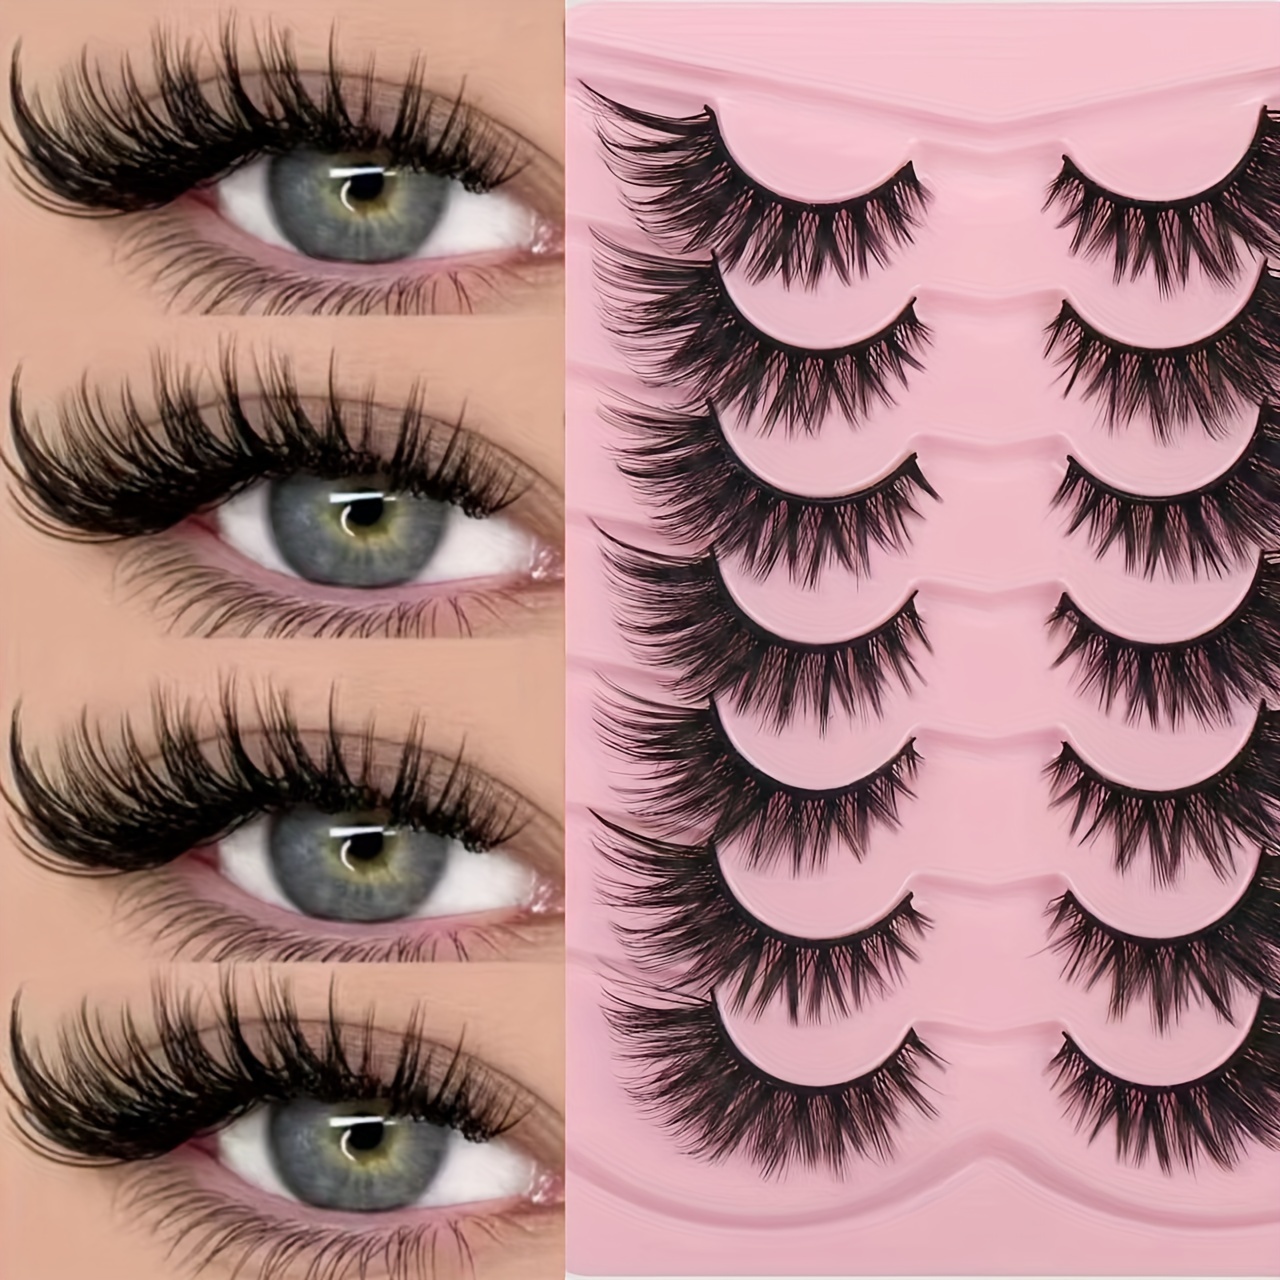 

Luxurious 3d Plush False Eyelashes - Thick, Fluffy & Lightweight For Beginners | Reusable Self-adhesive Lashes In Various Styles (c/d , 10-12mm/16-18mm/6-9mm) Eyelash Accessories Eyelashes Kit